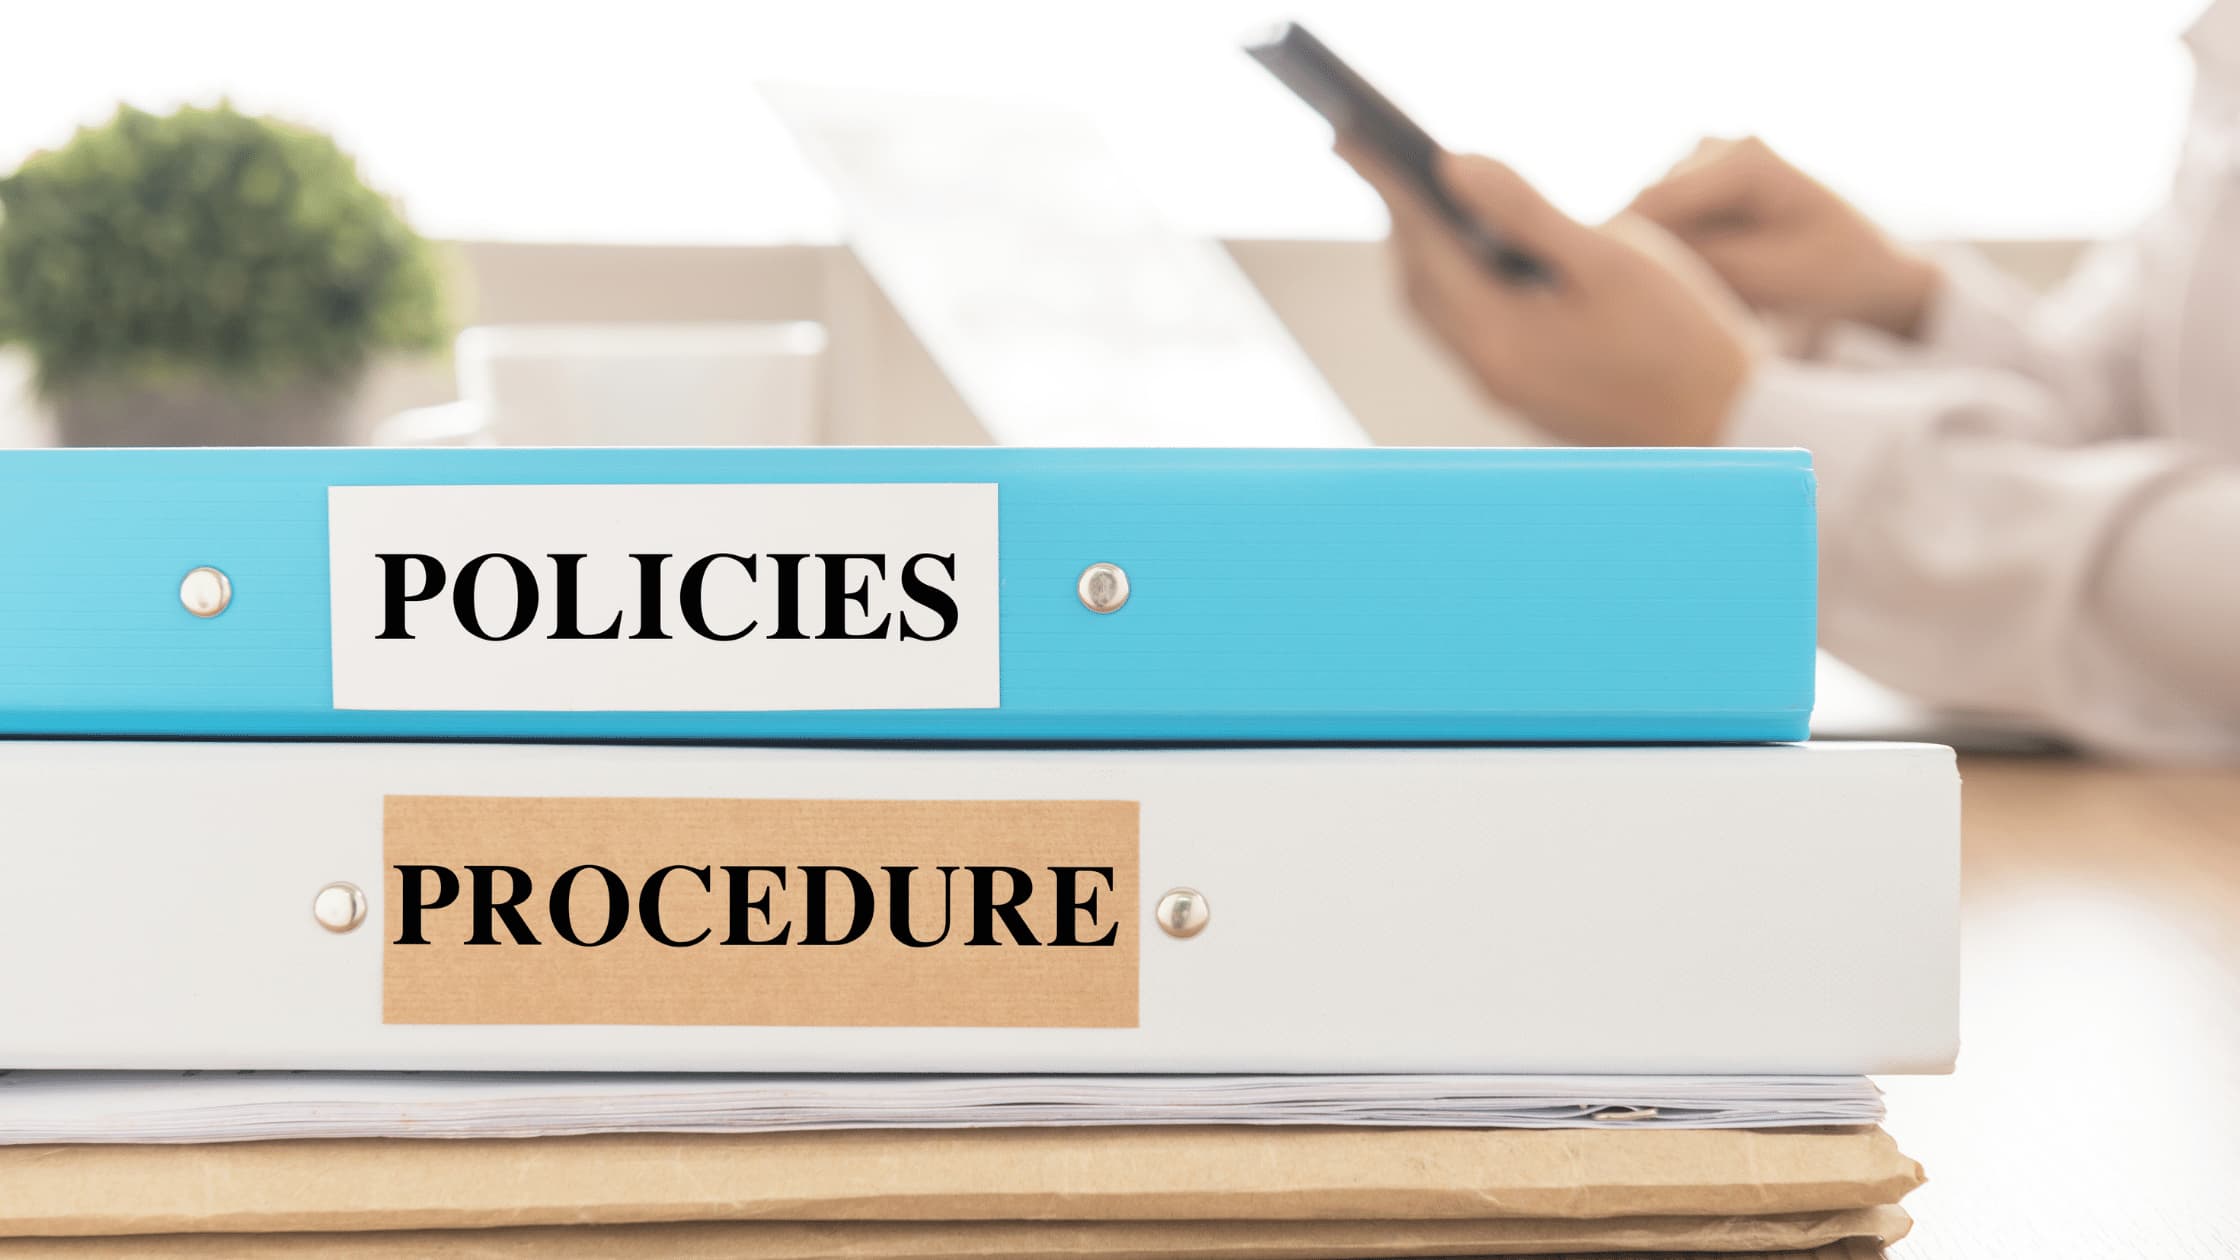 safety policies and procedures in binders